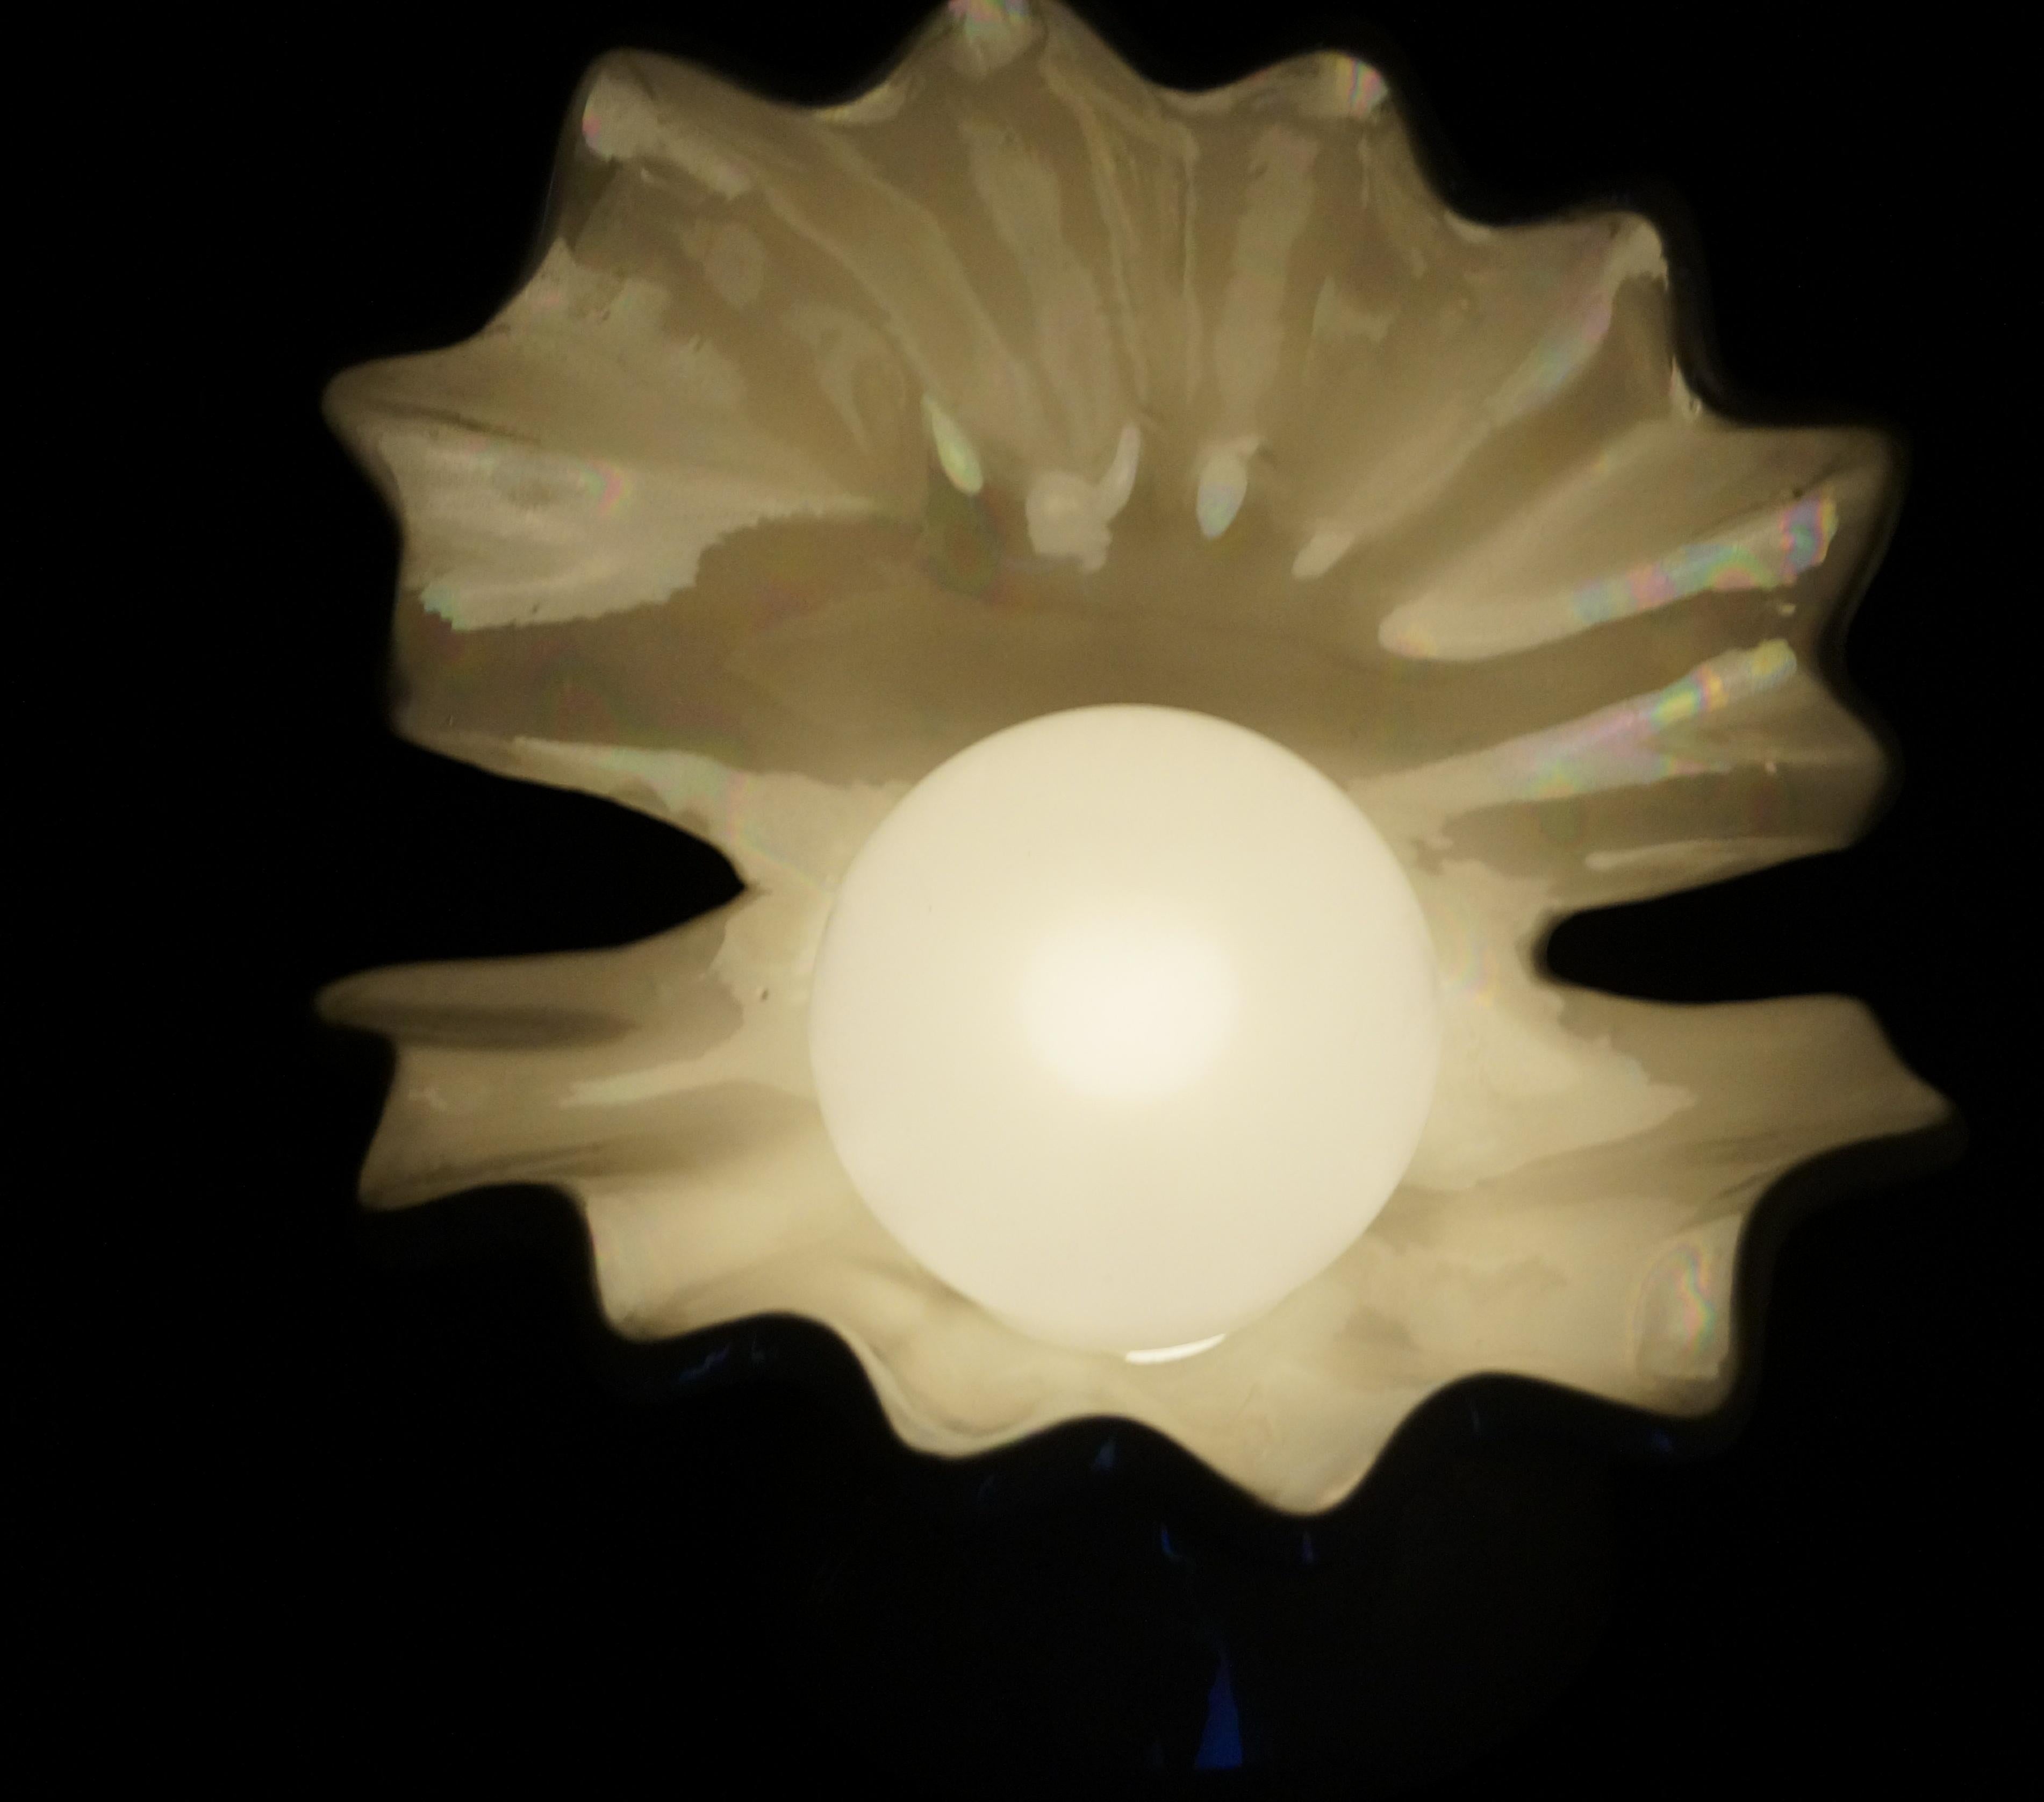 clam lamp with pearl